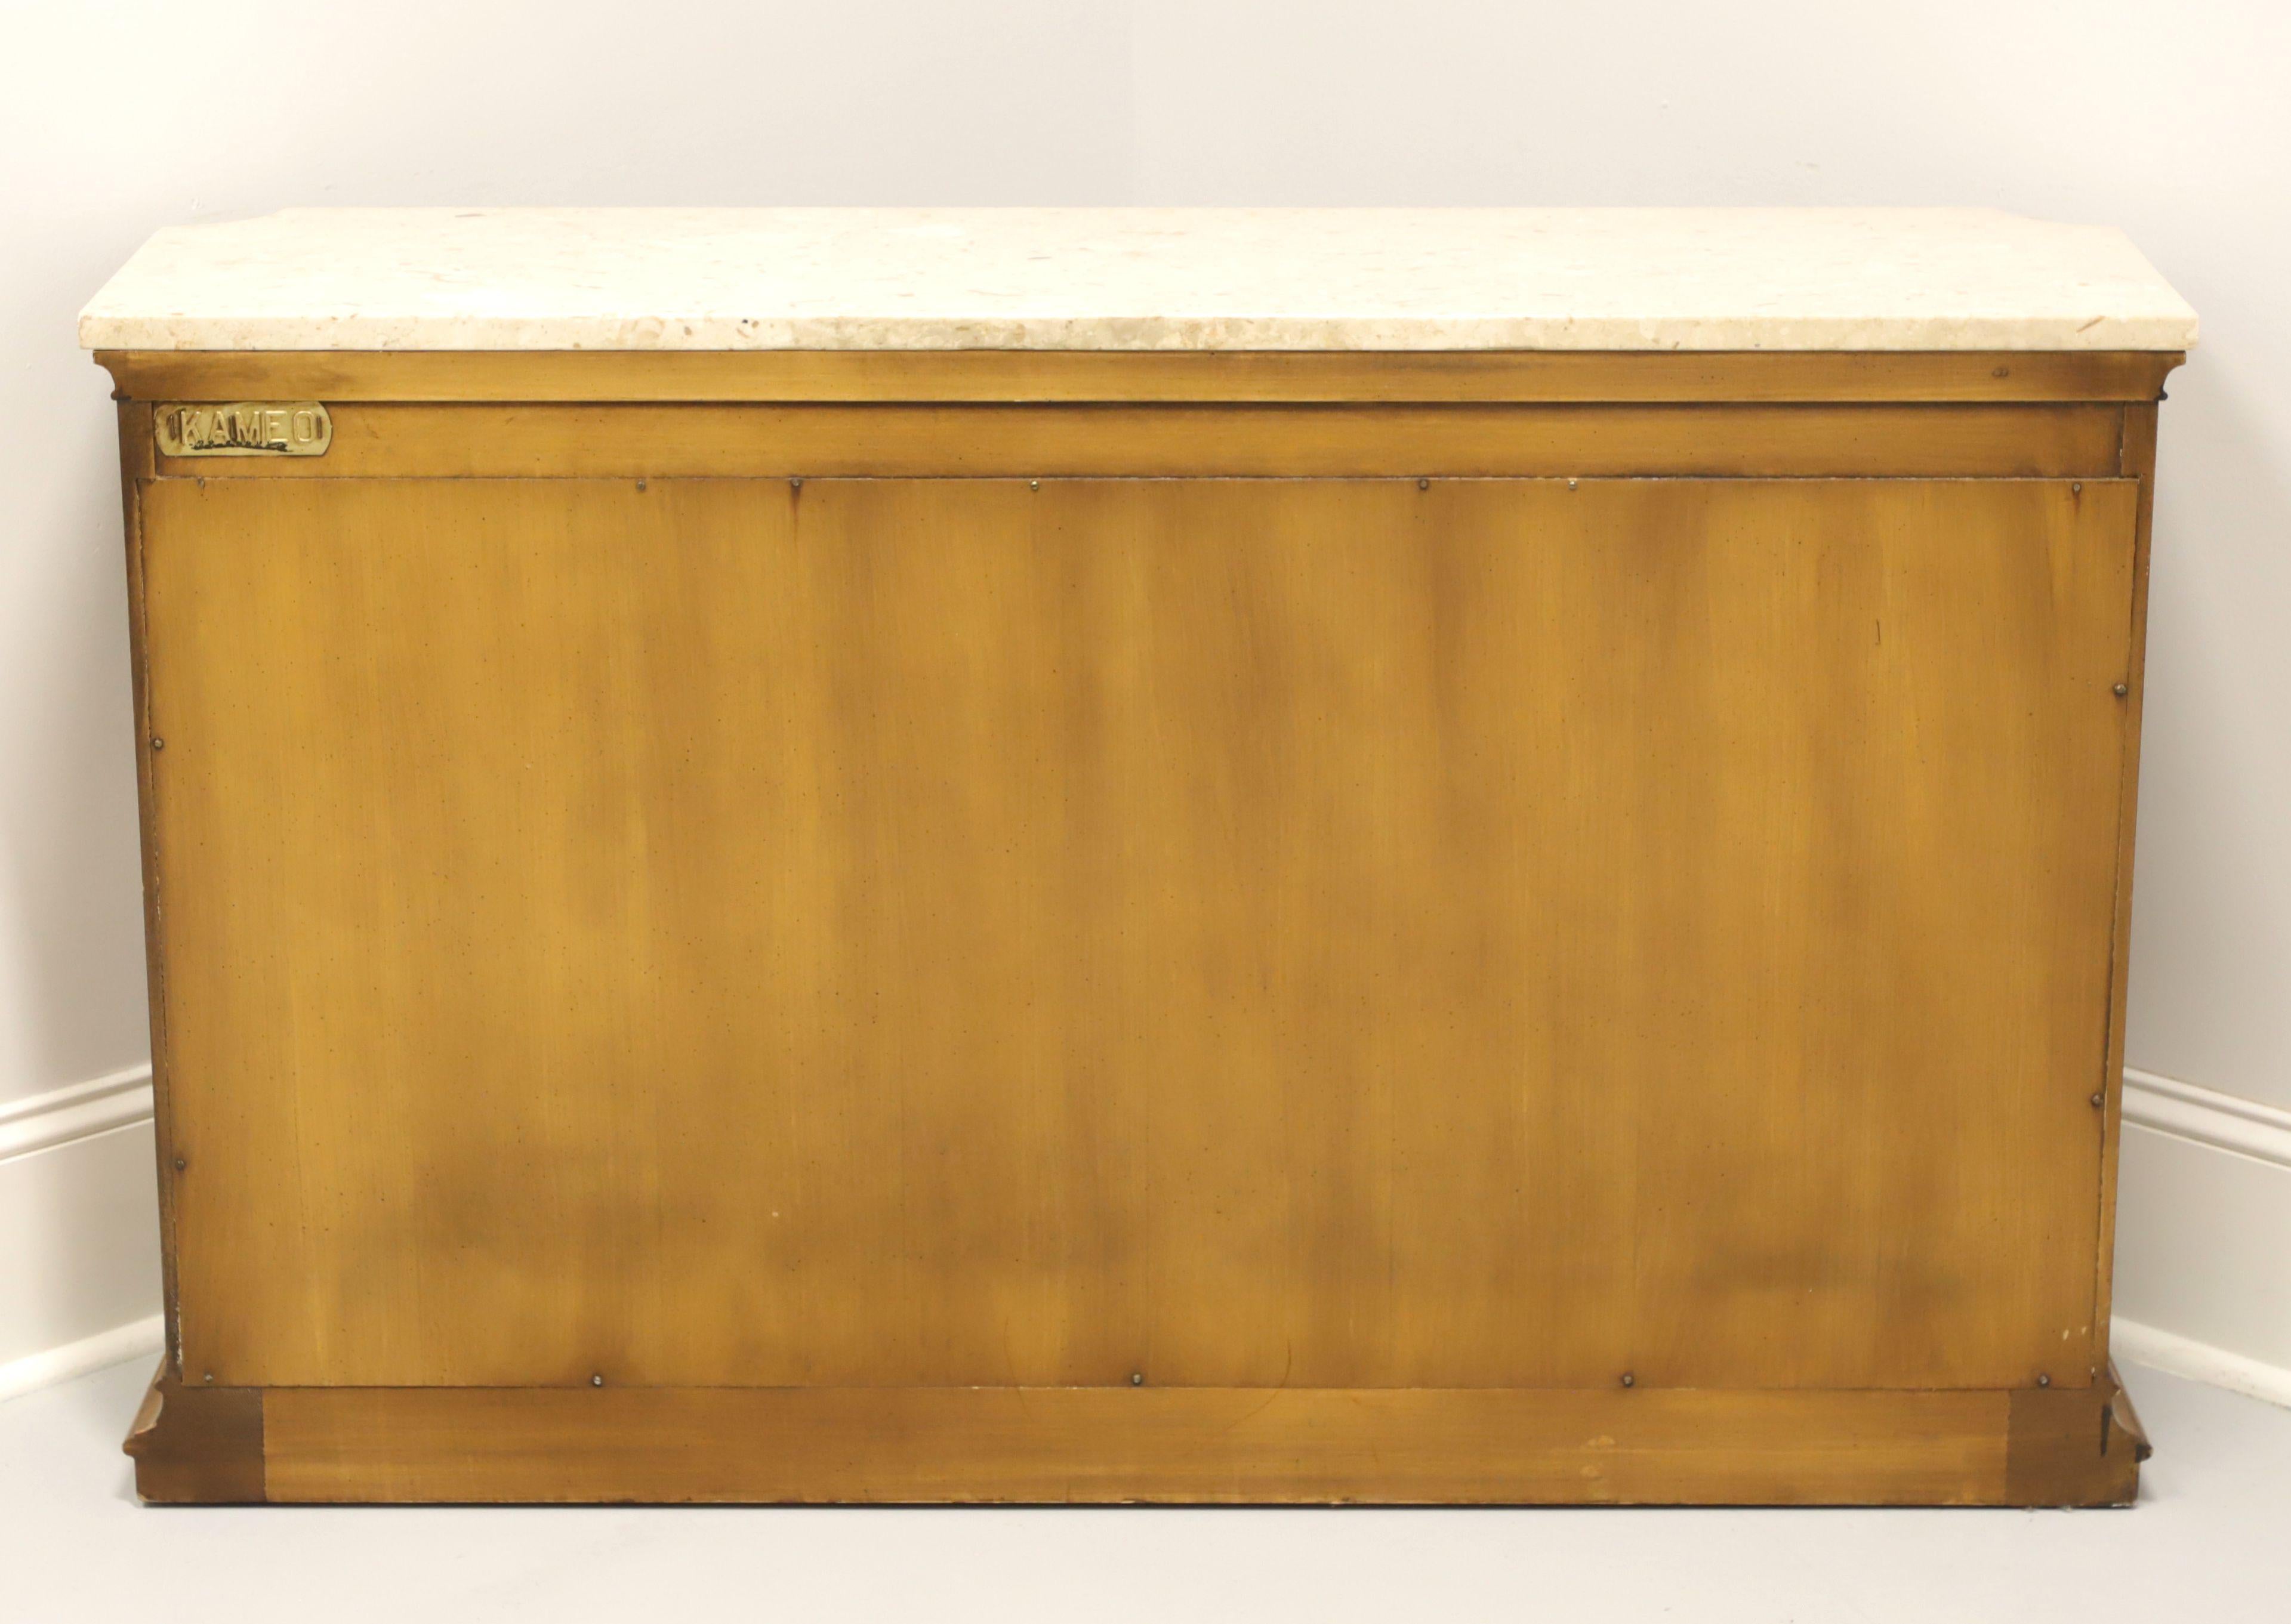 Italian WEIMAN KAMEO Mid 20th Century Mediterranean Style Marble Top Console Cabinet